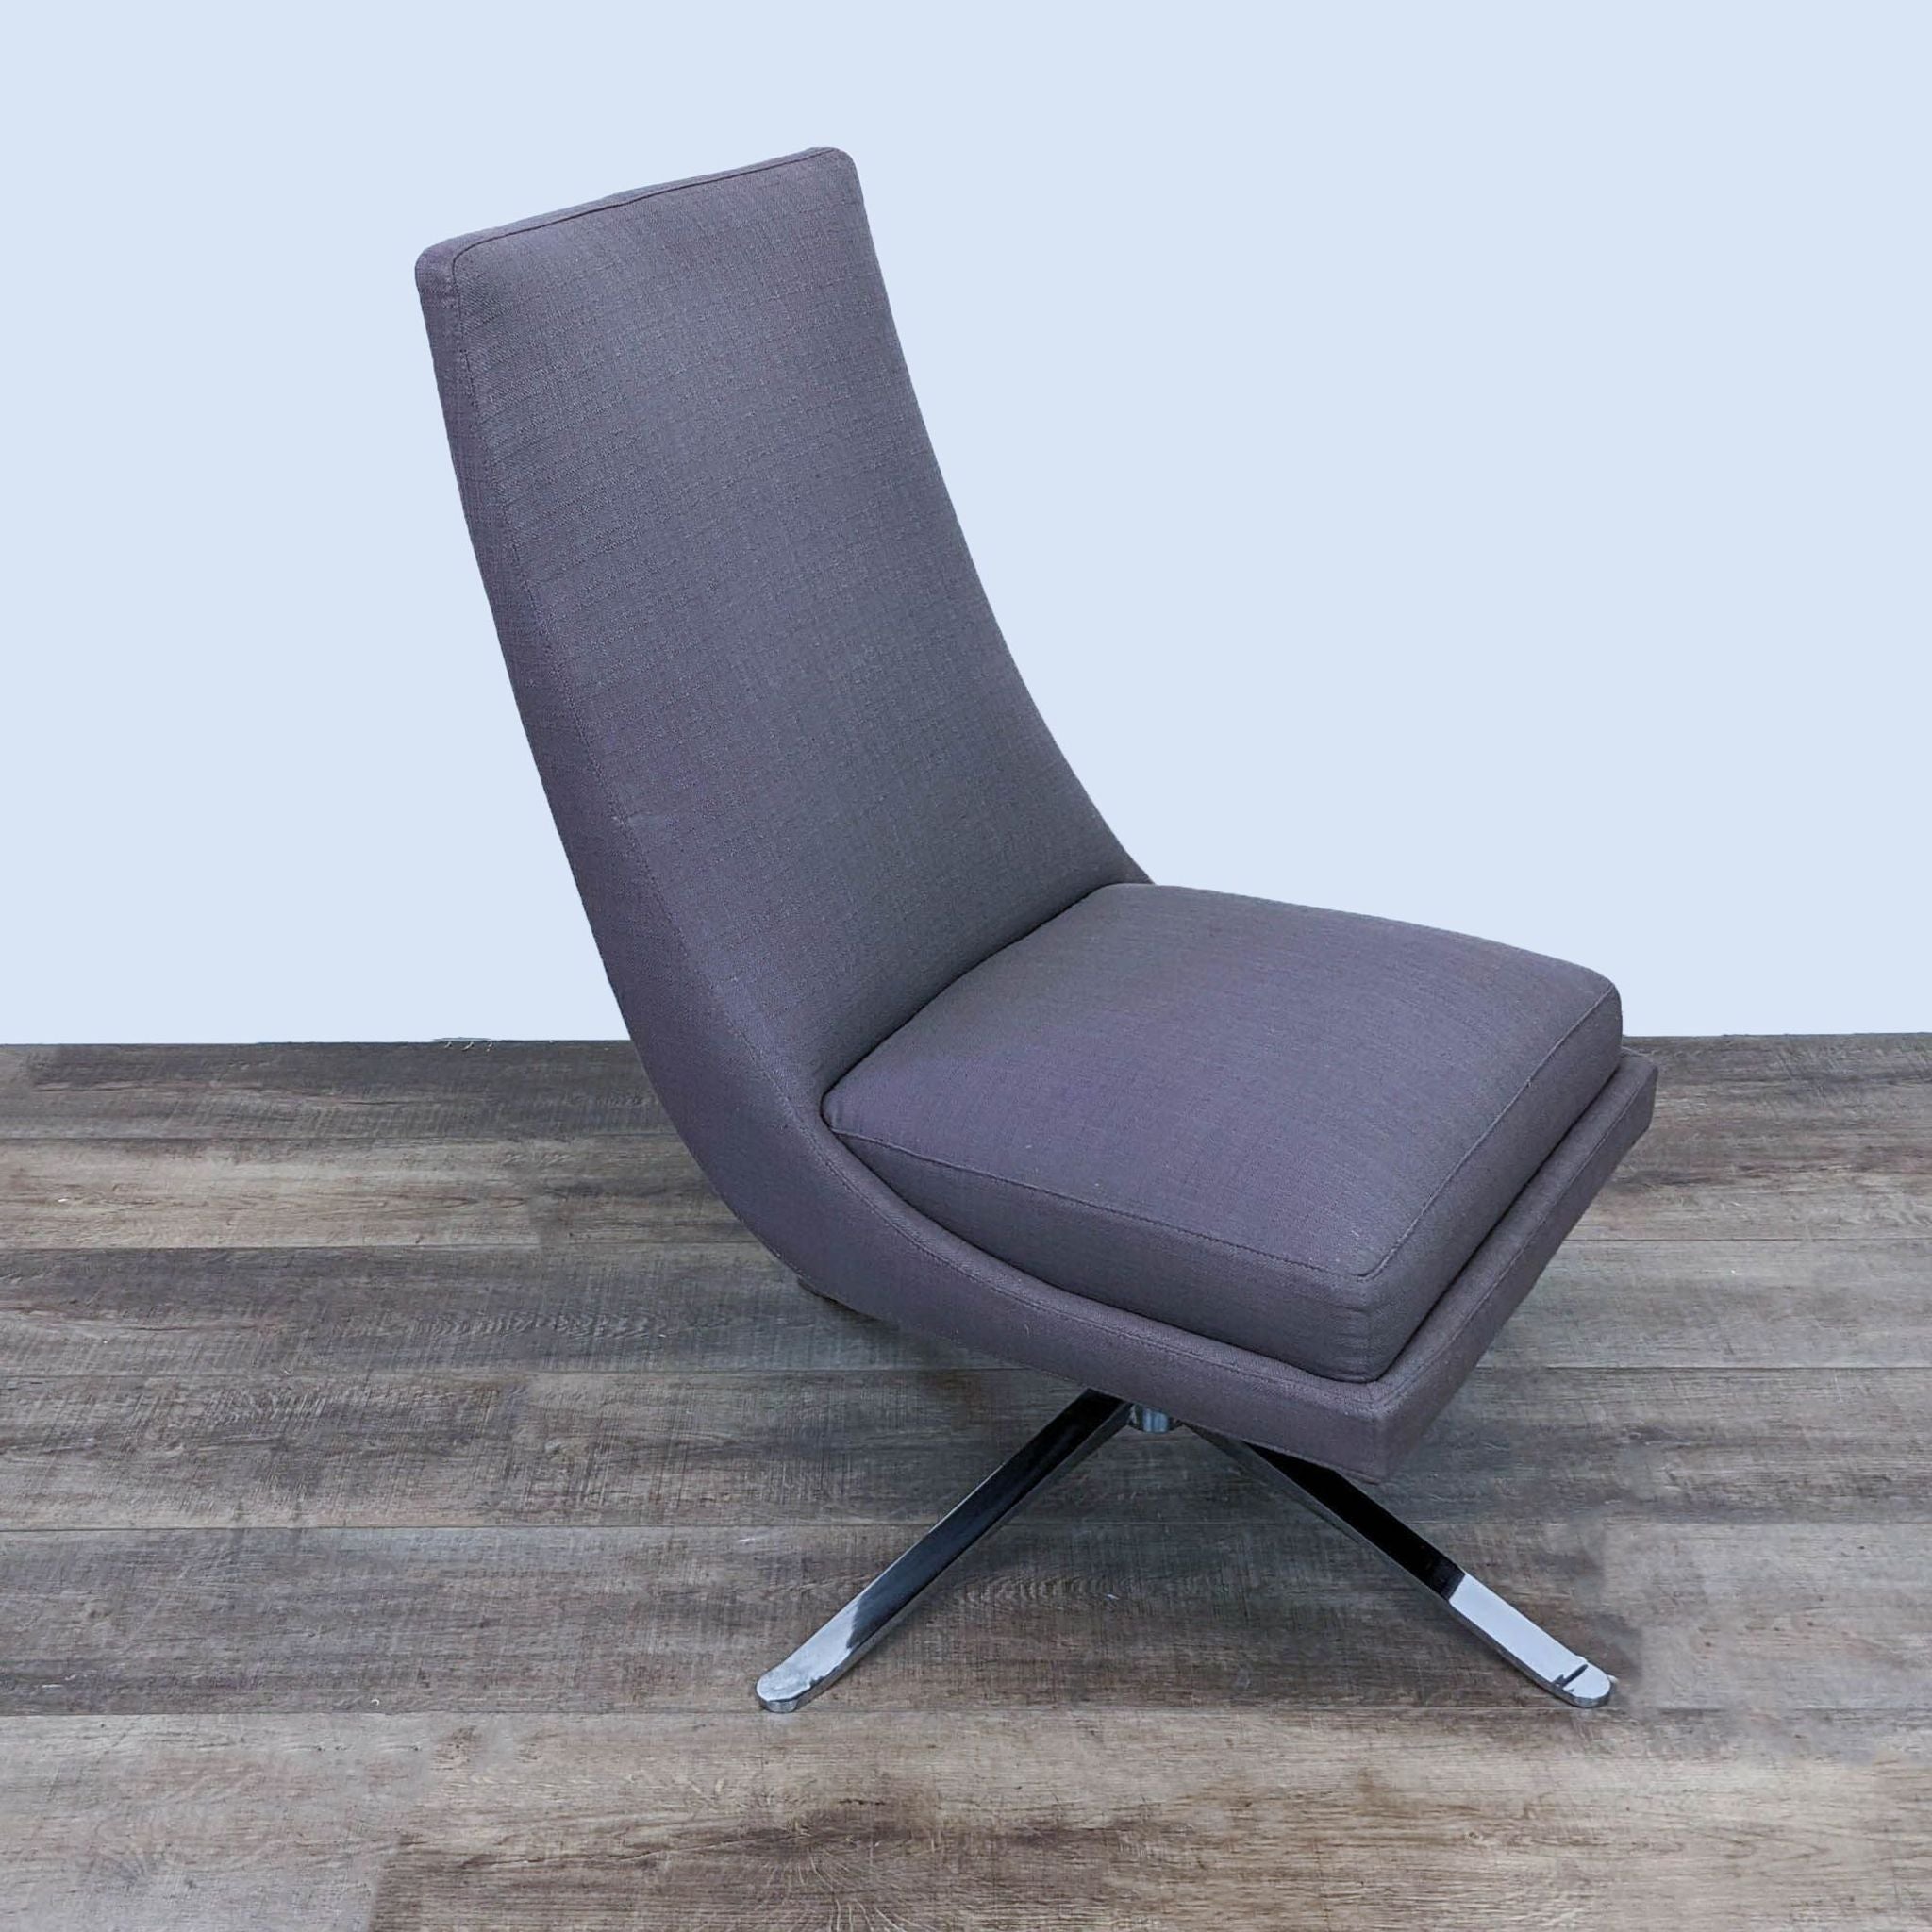 Reperch contemporary lounge chair in gray fabric, featuring high back and chrome star-shaped swivel base, displayed in side view.